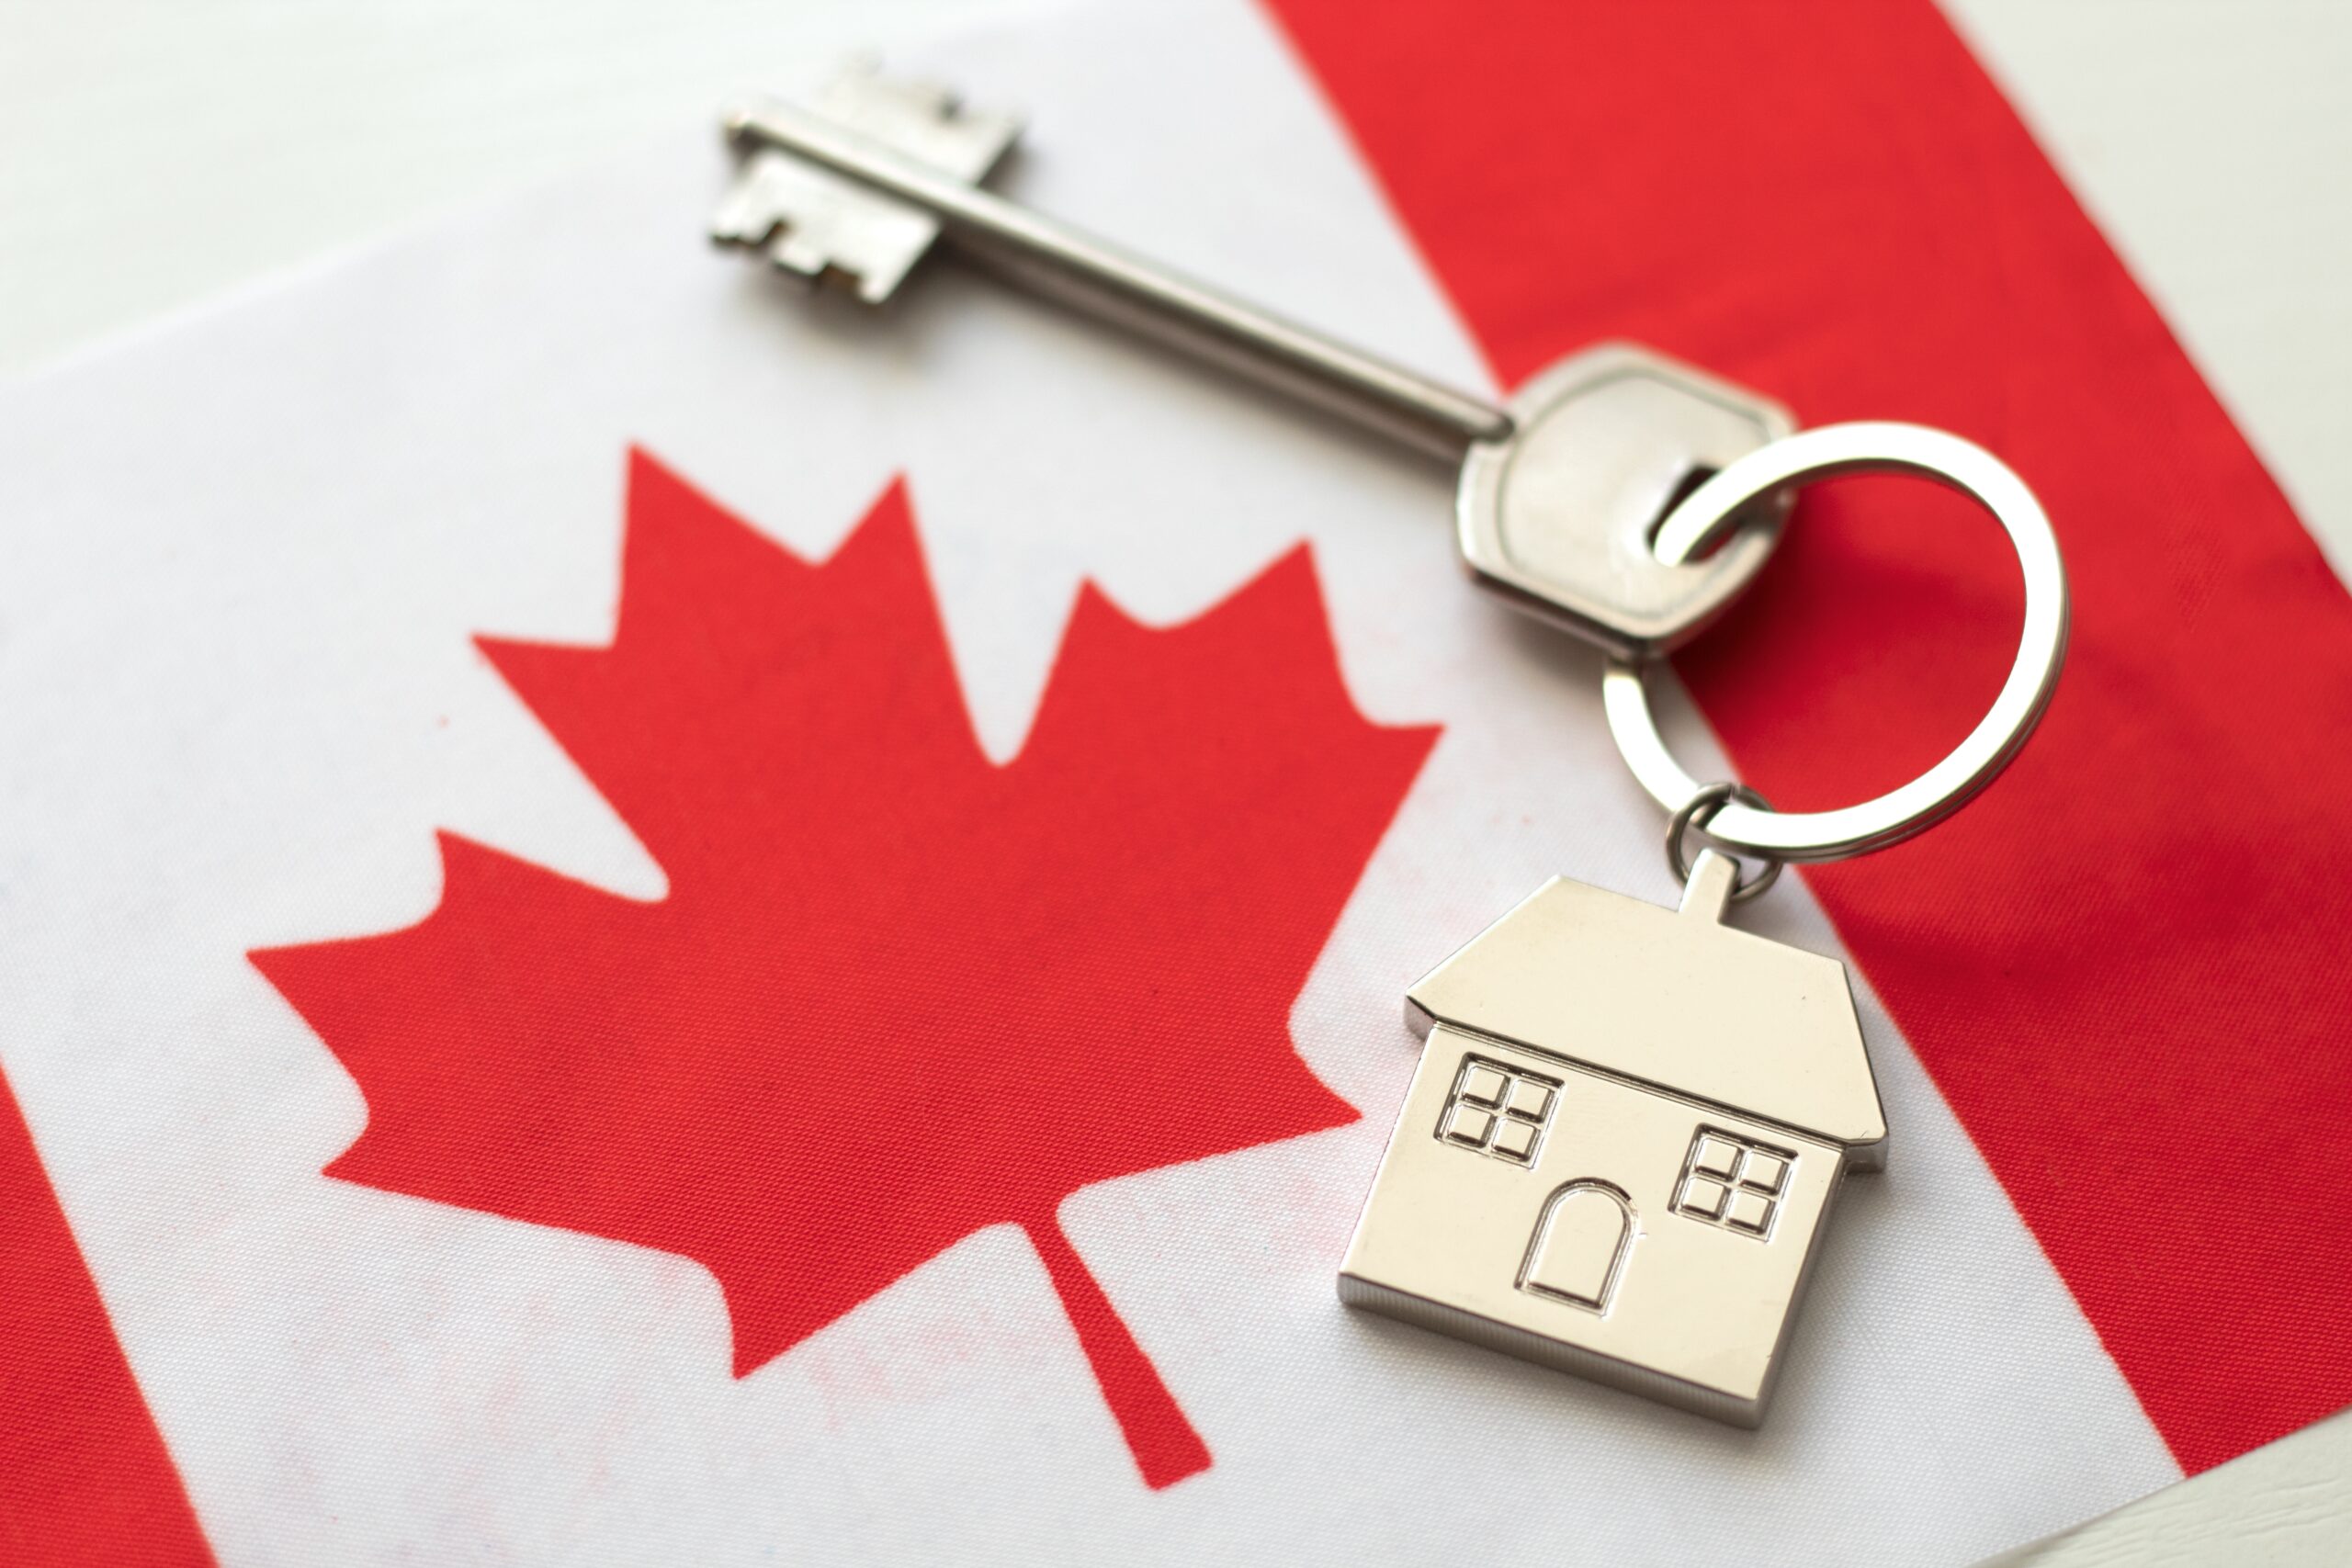 House,With,The,Flag,Of,Canada.,Immigration,To,Canada.,Buying